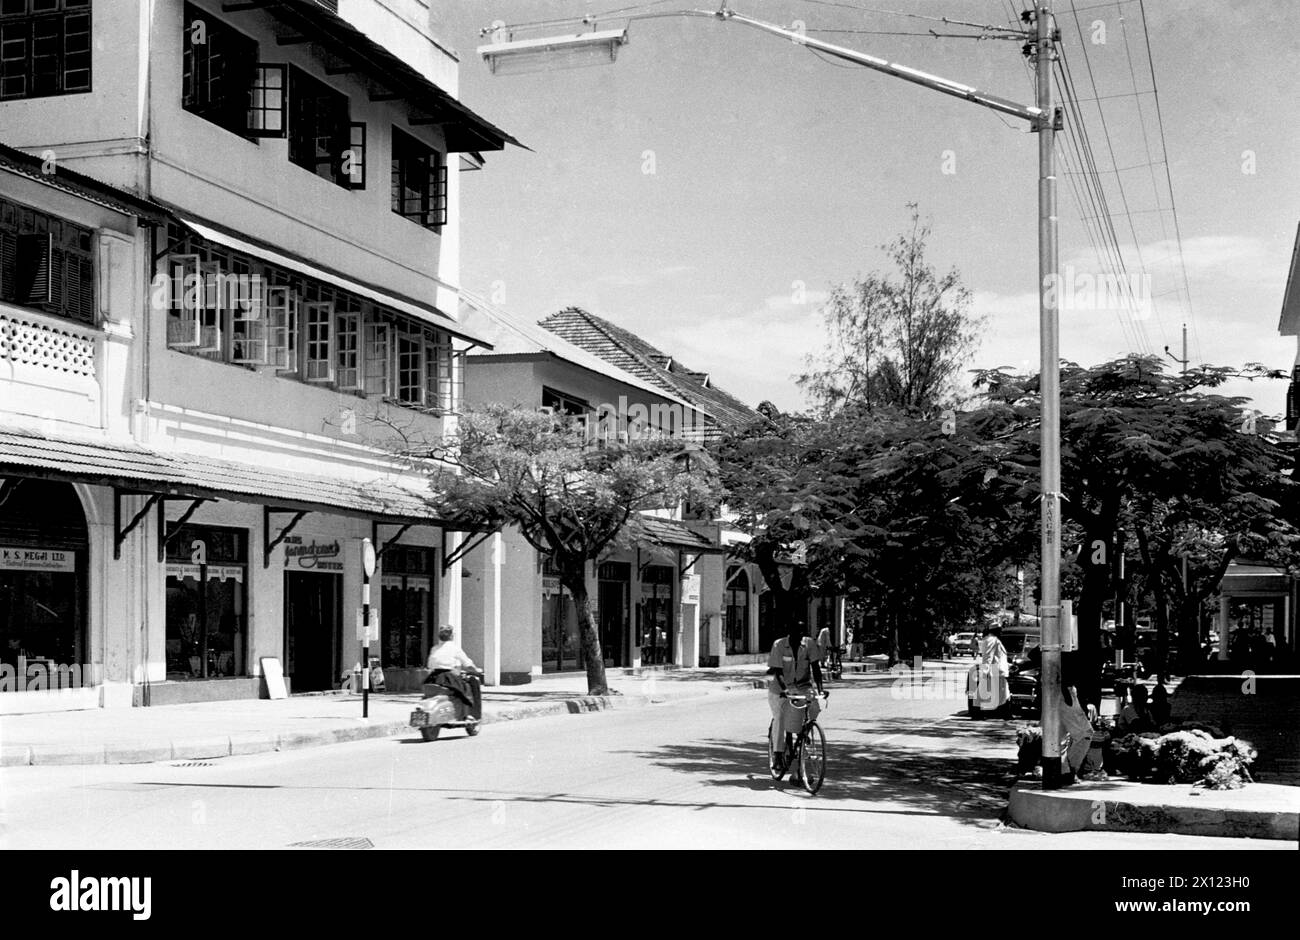 Historic Street Scene on Makunganya Street in the Old Town or Historic District of Dar es Salaam Tanzania, formerly Tanganyika. Vintage or Historic Monochrome or Black and White Image c1960 Stock Photo